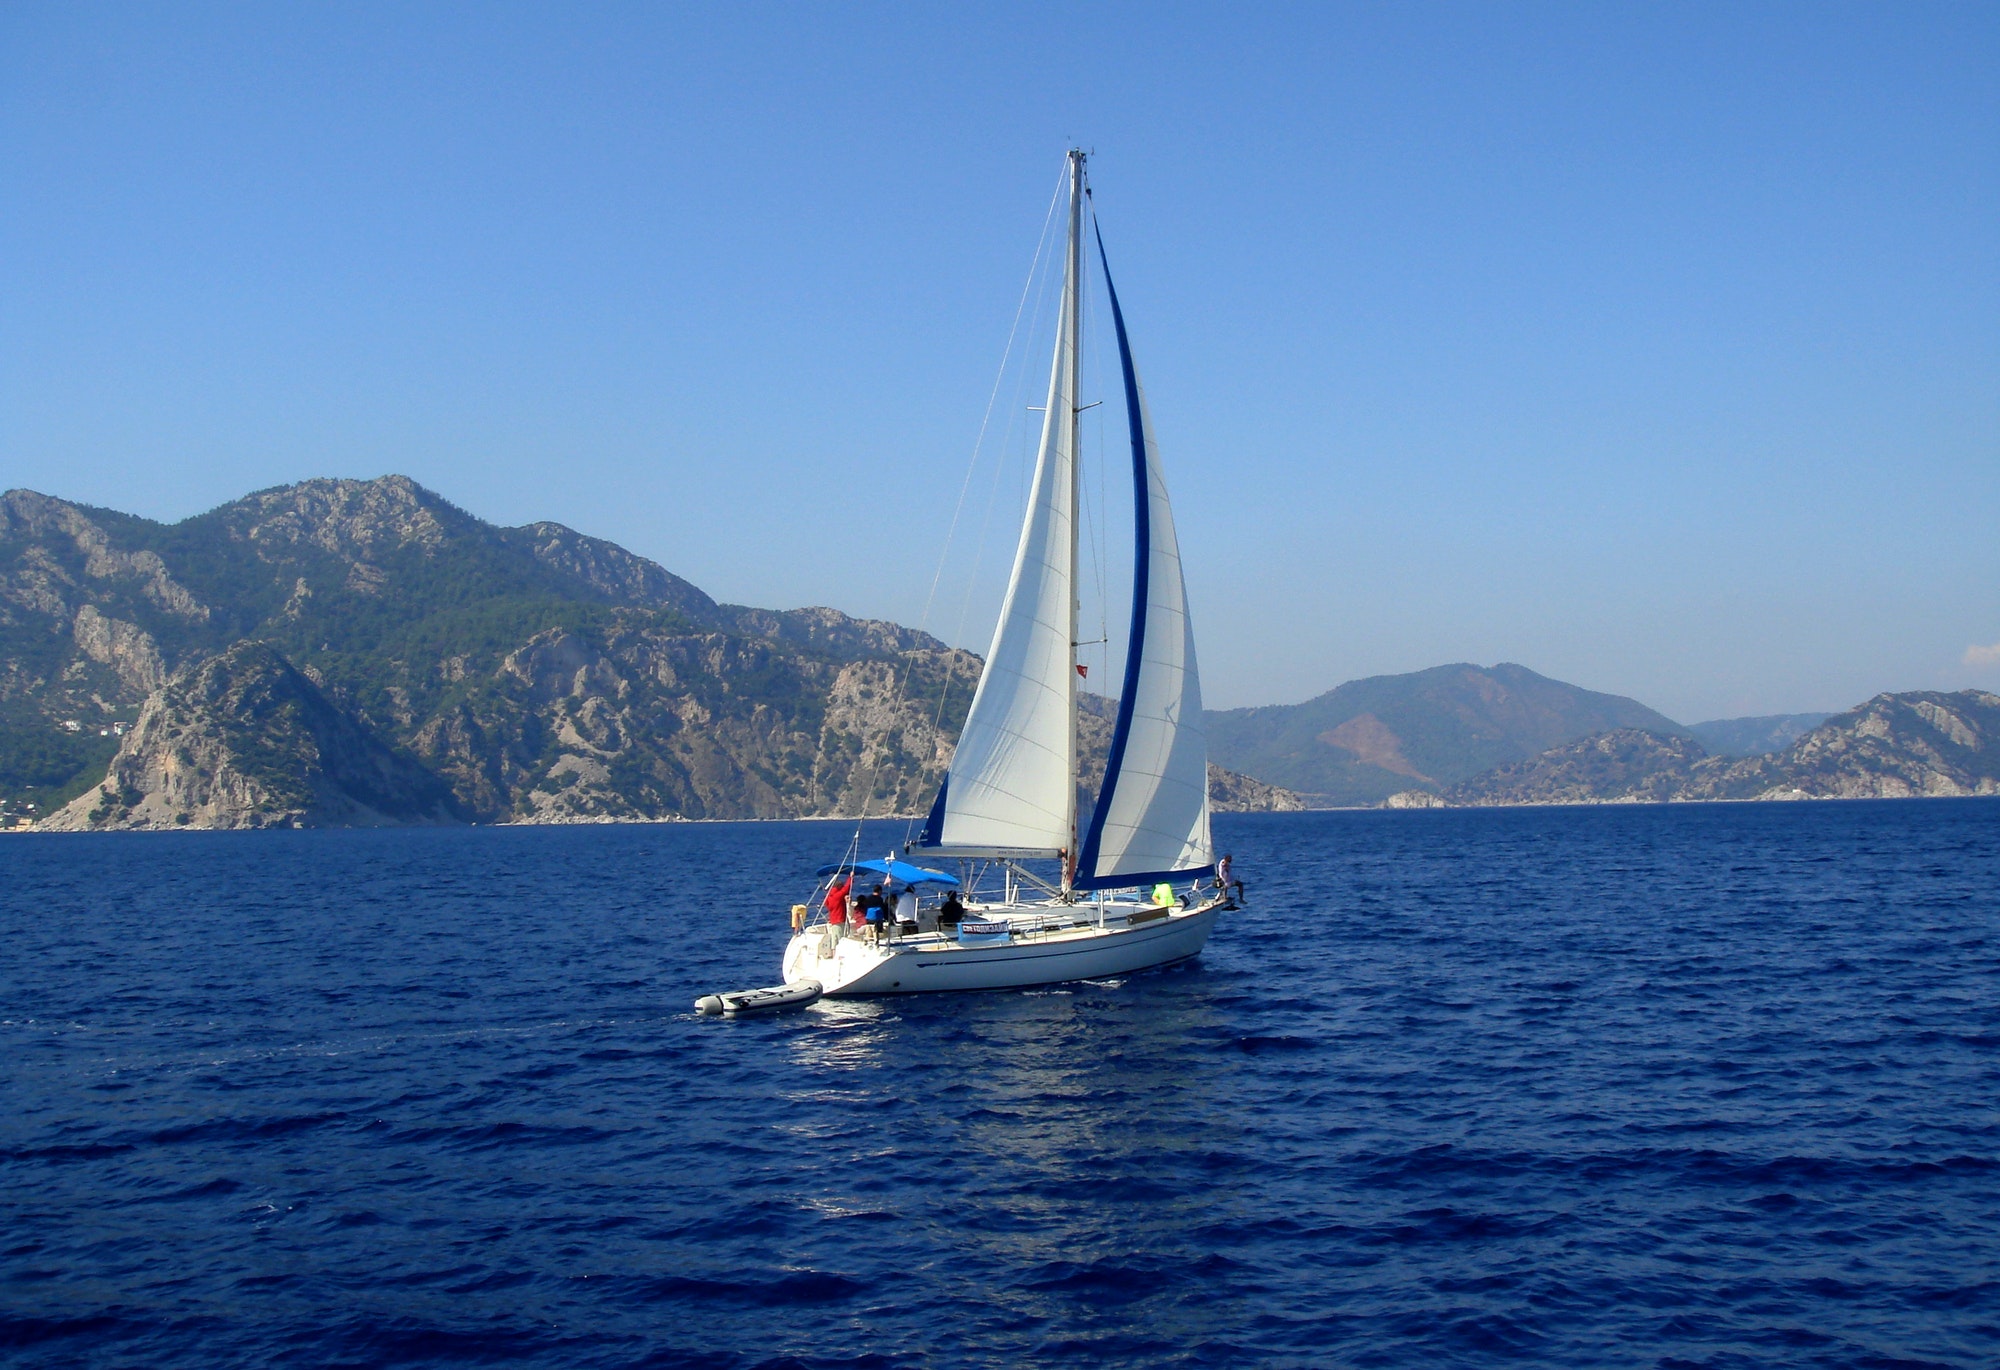 Yacht with white sail sailing on a calm sea on a background of mountains.